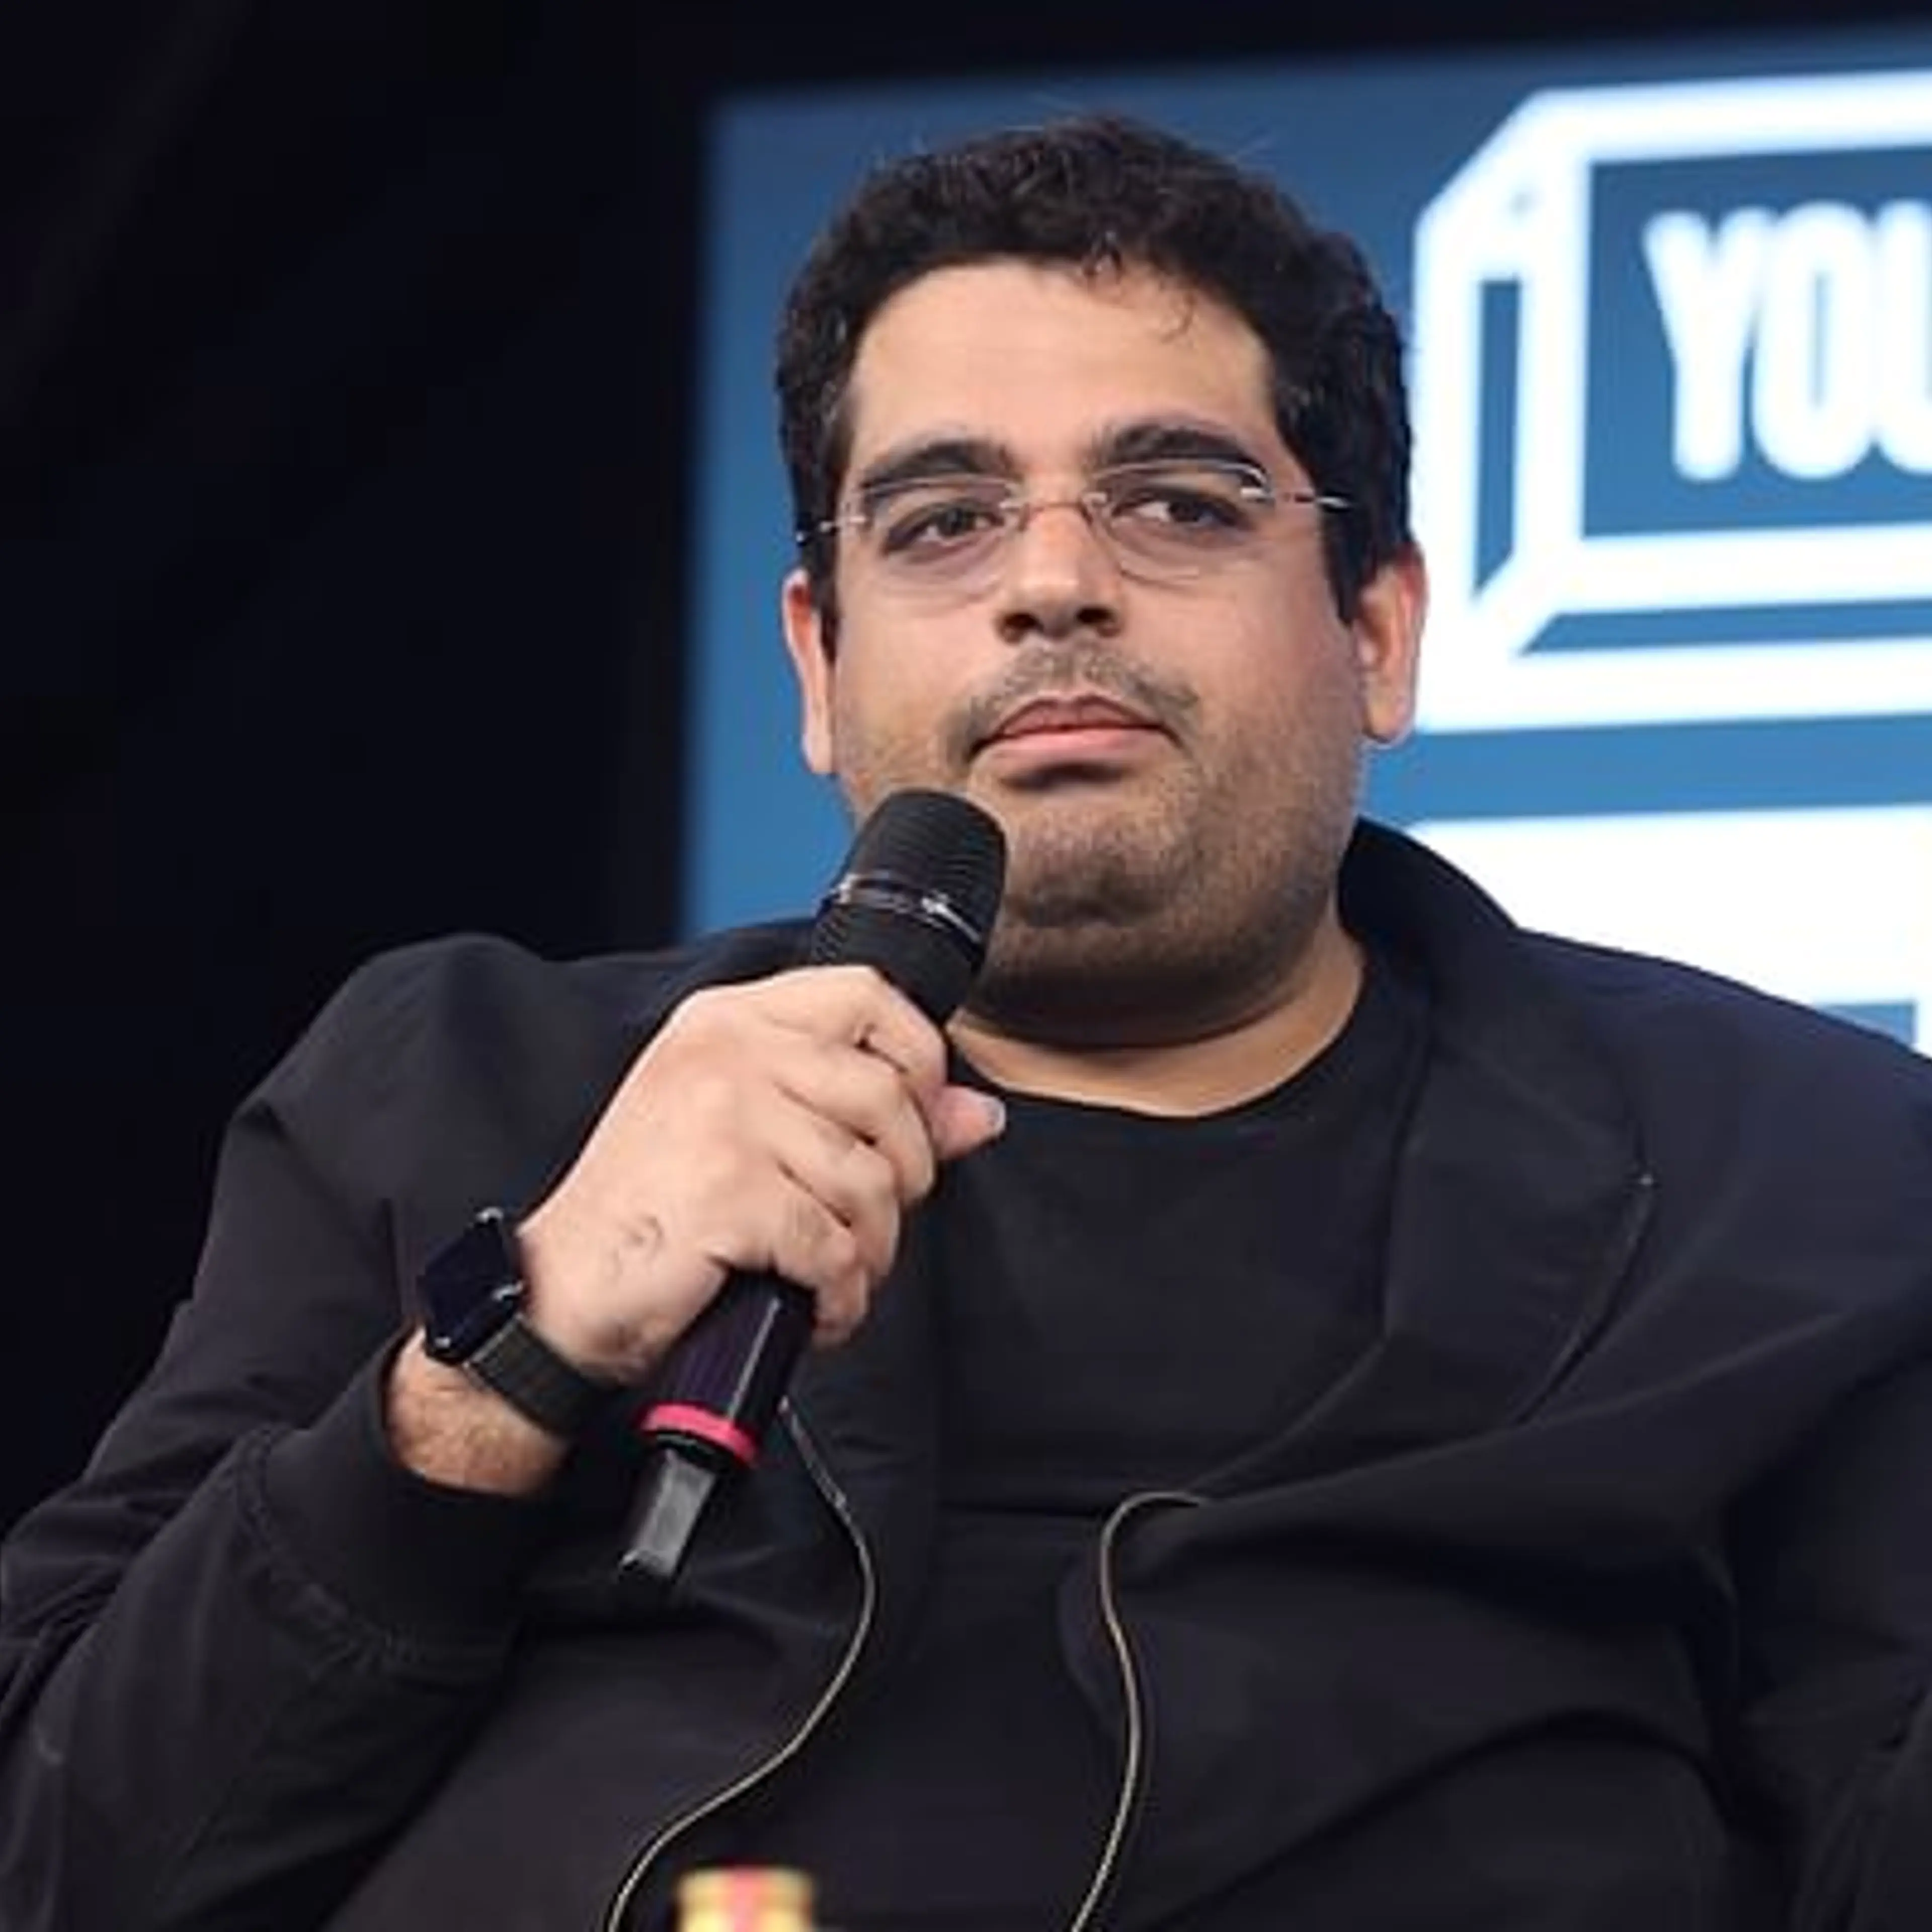 Unacademy being built for the long run, says Gaurav Munjal amid merger, sale reports